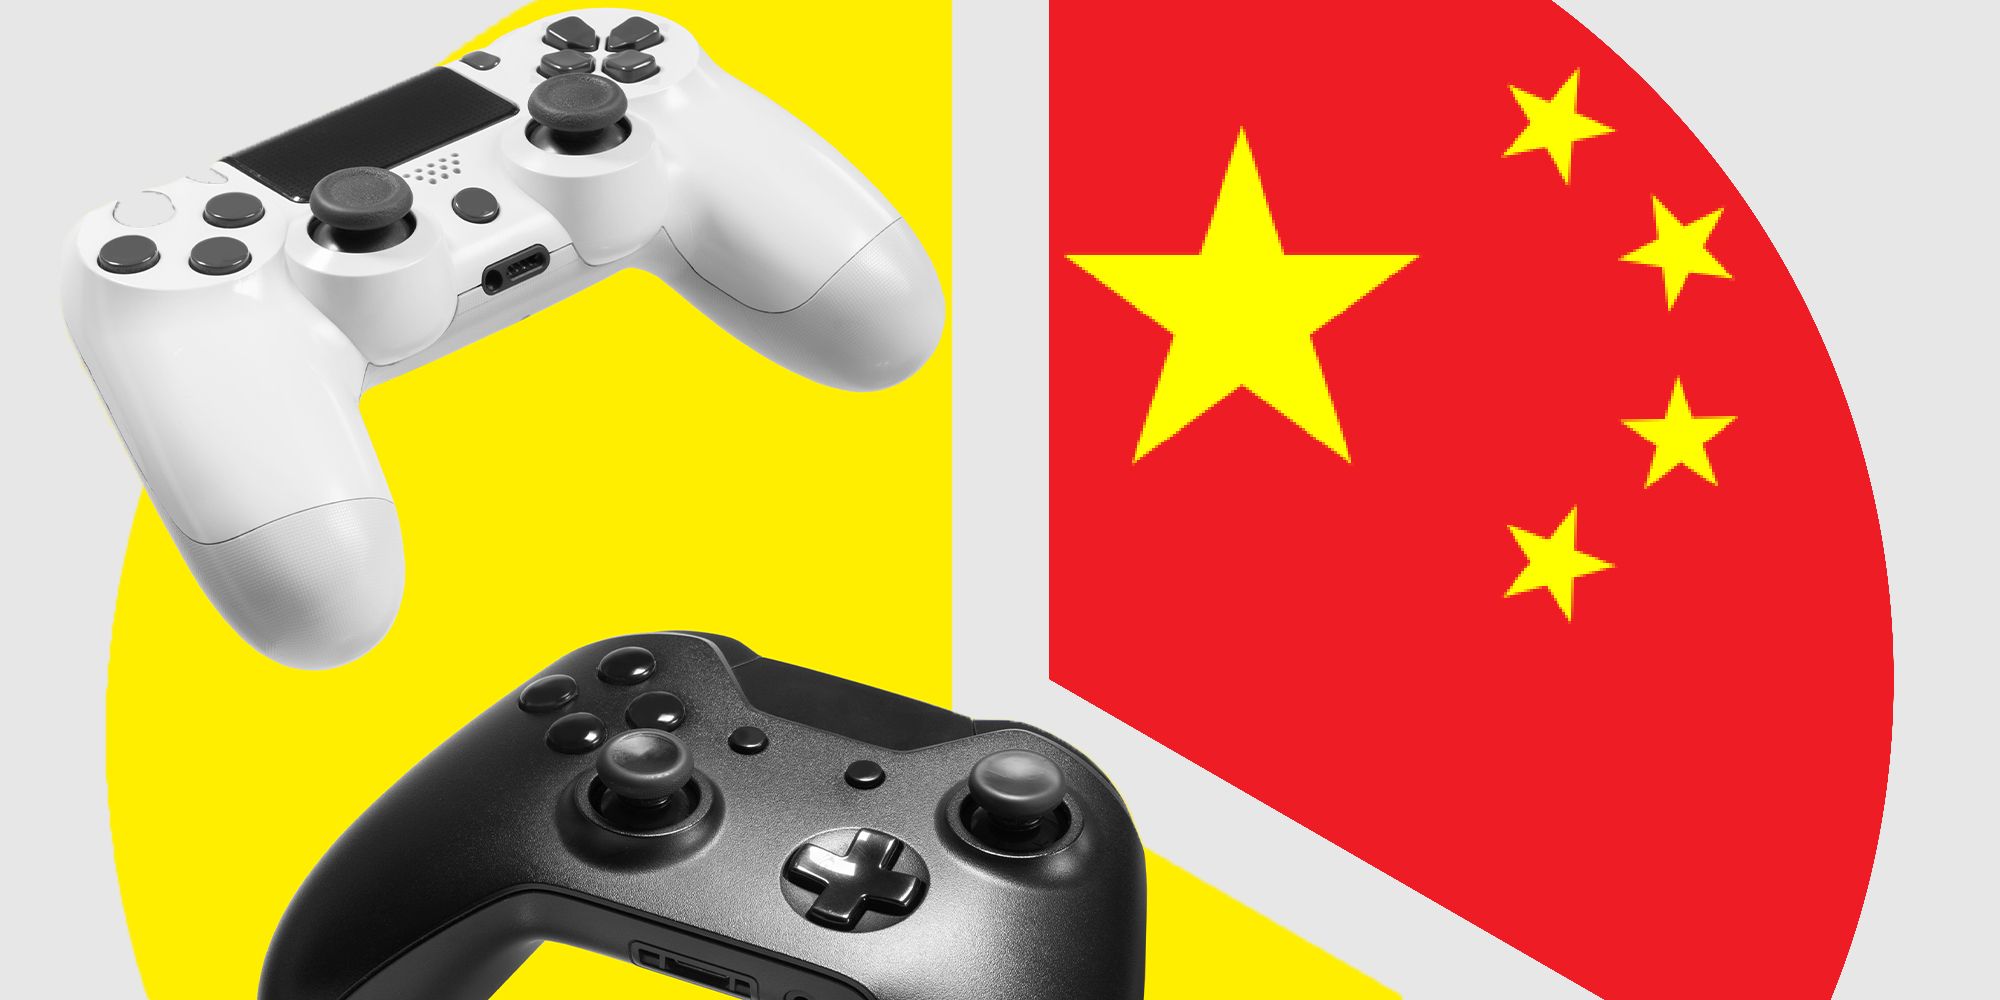 controllers and a china flag